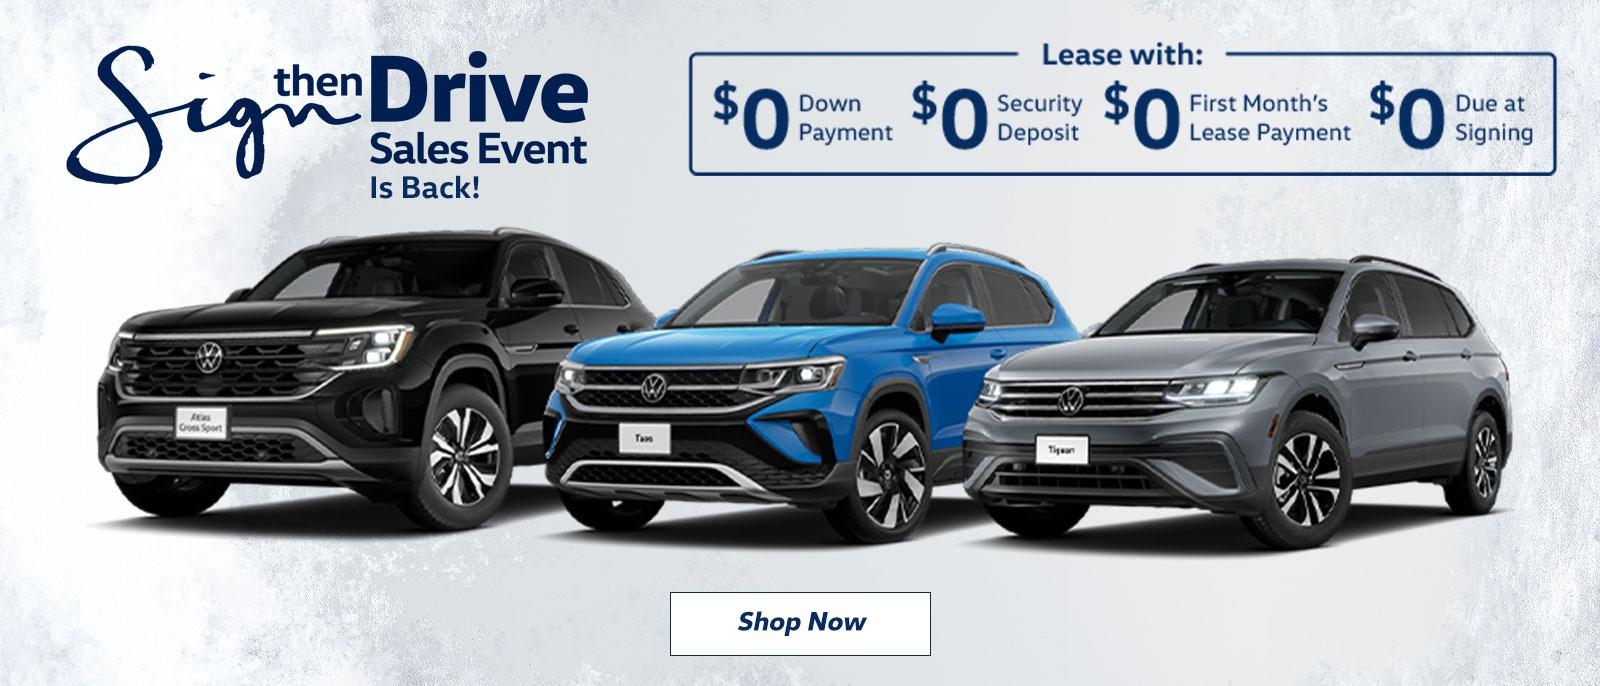 Generic Sign Then Drive Sales Event